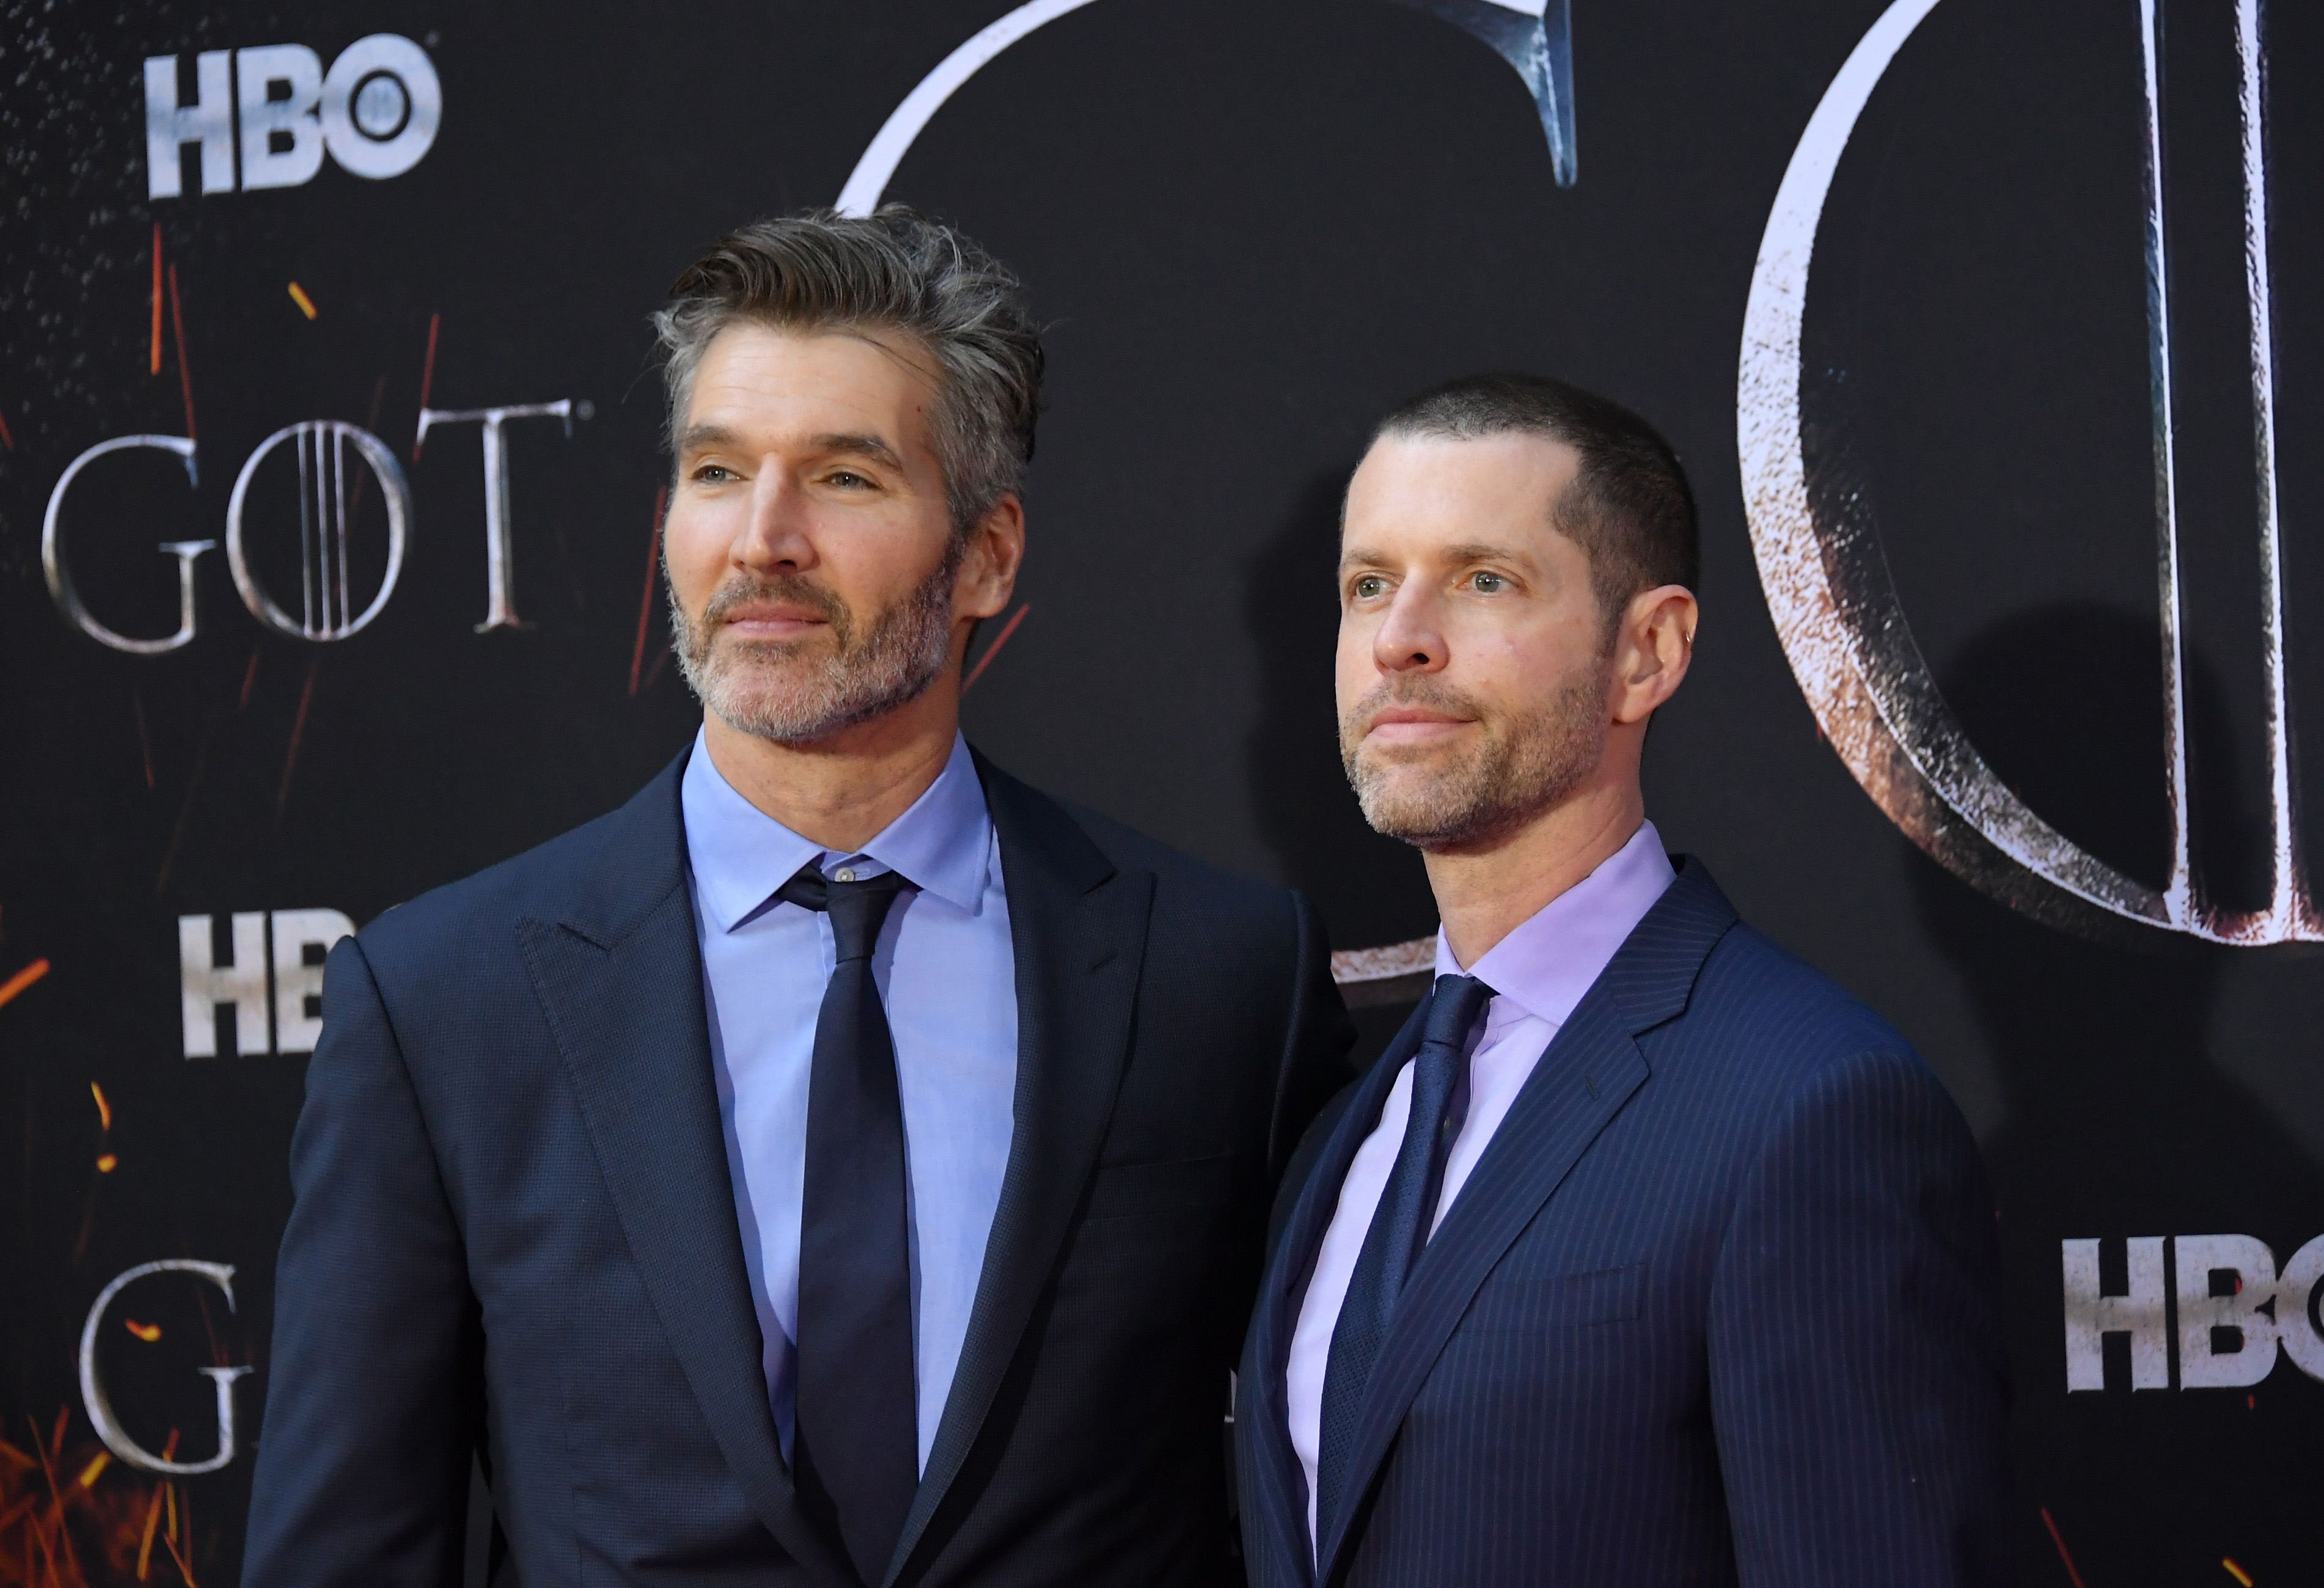 David Benioff and D. B. Weiss attend the "Game Of Thrones" season 8 premiere on April 3, 2019 in New York City. (Mike Coppola—FilmMagic)